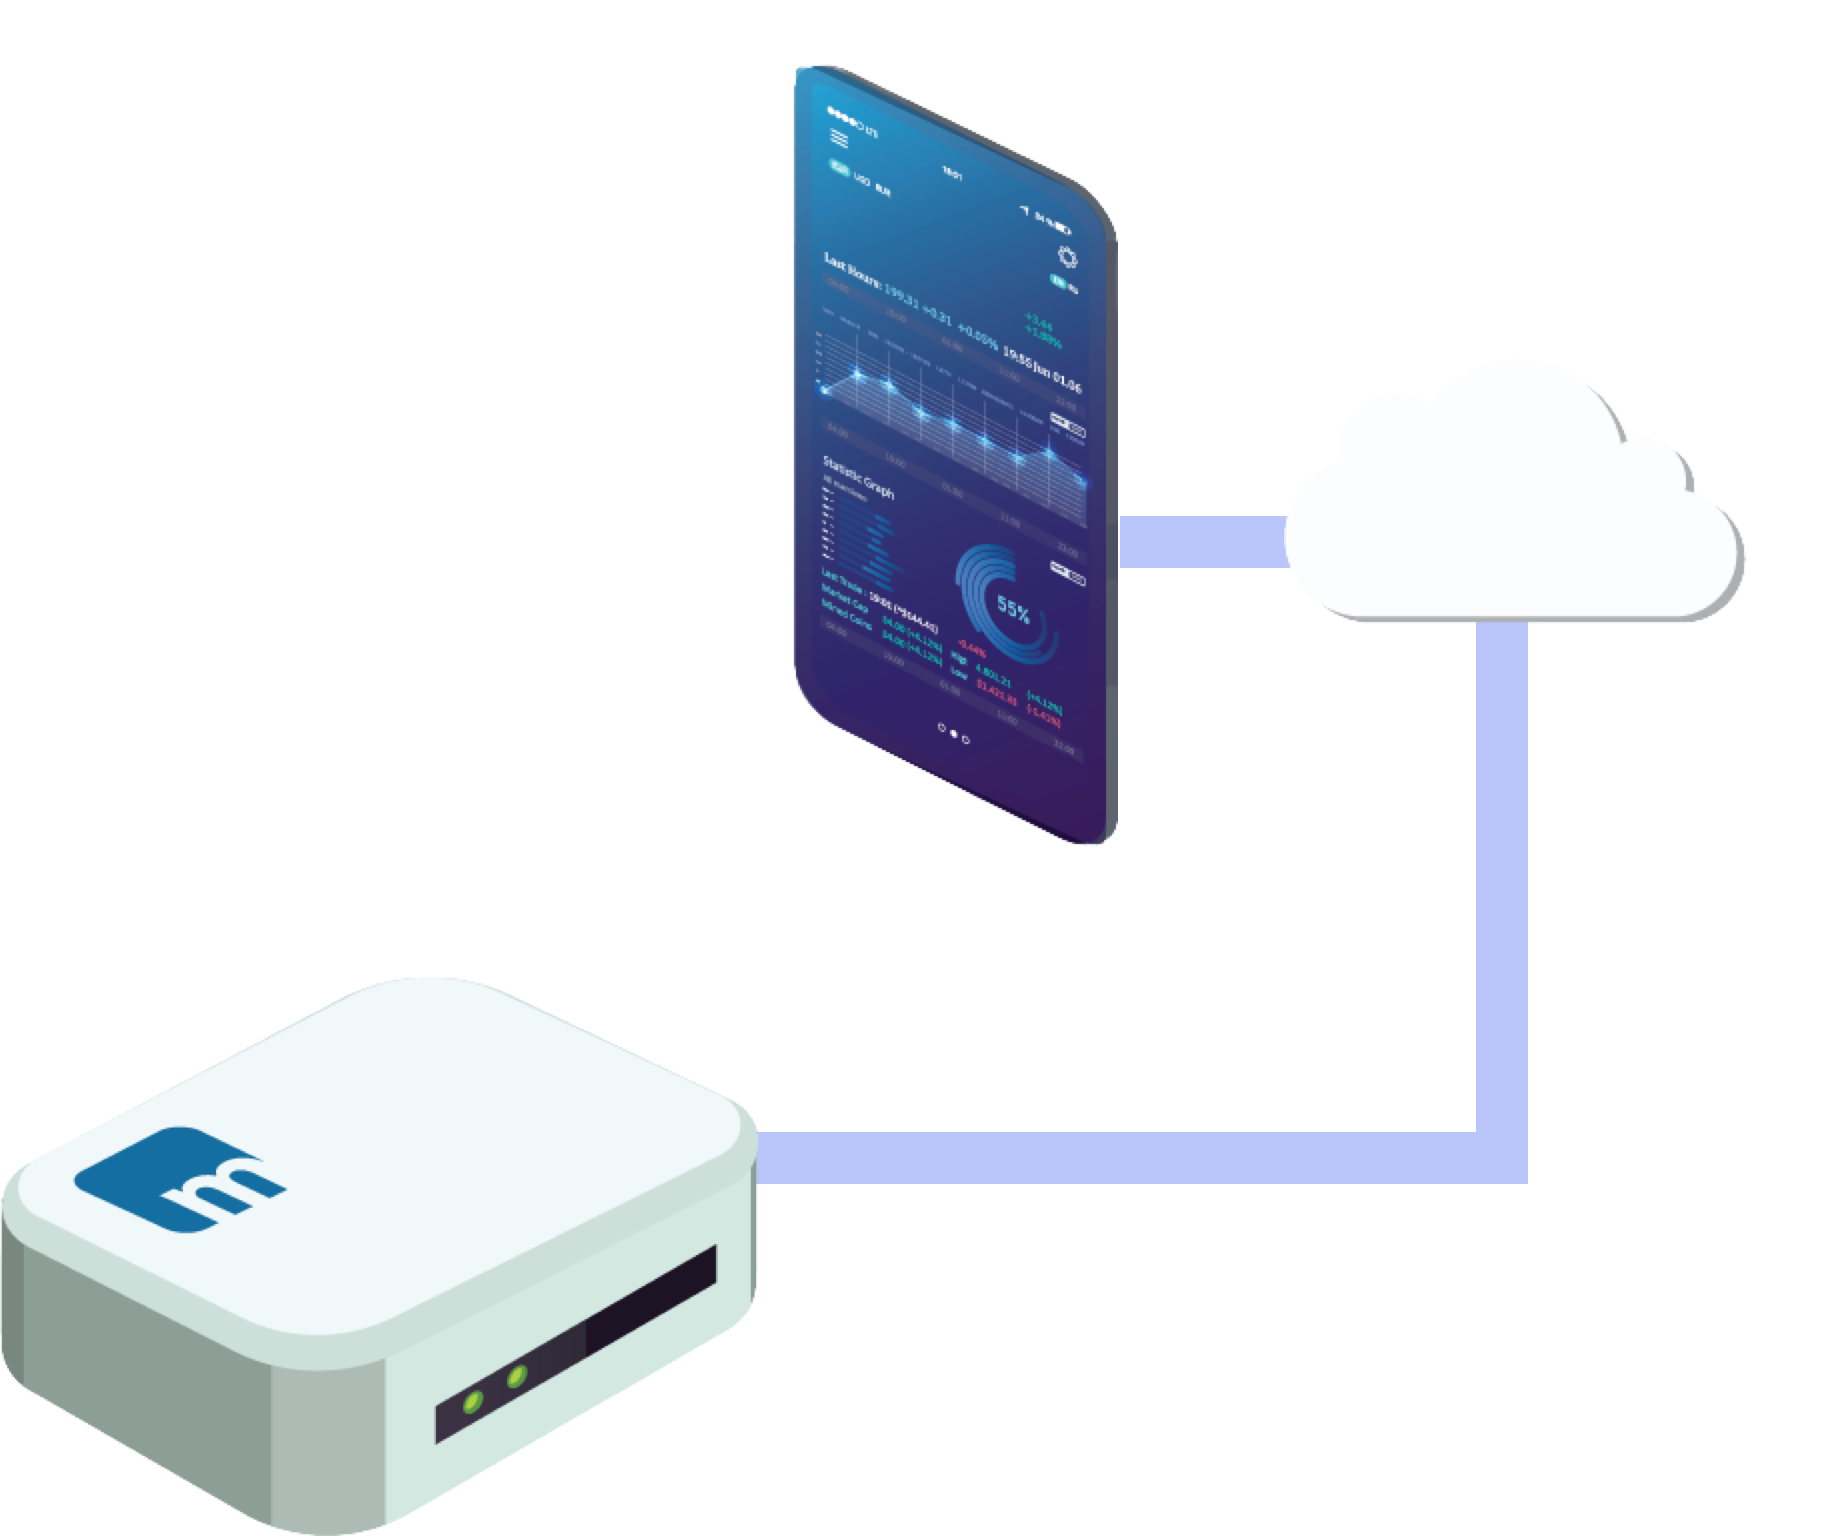 Secure Remote Access and Control of Your IoT Devices